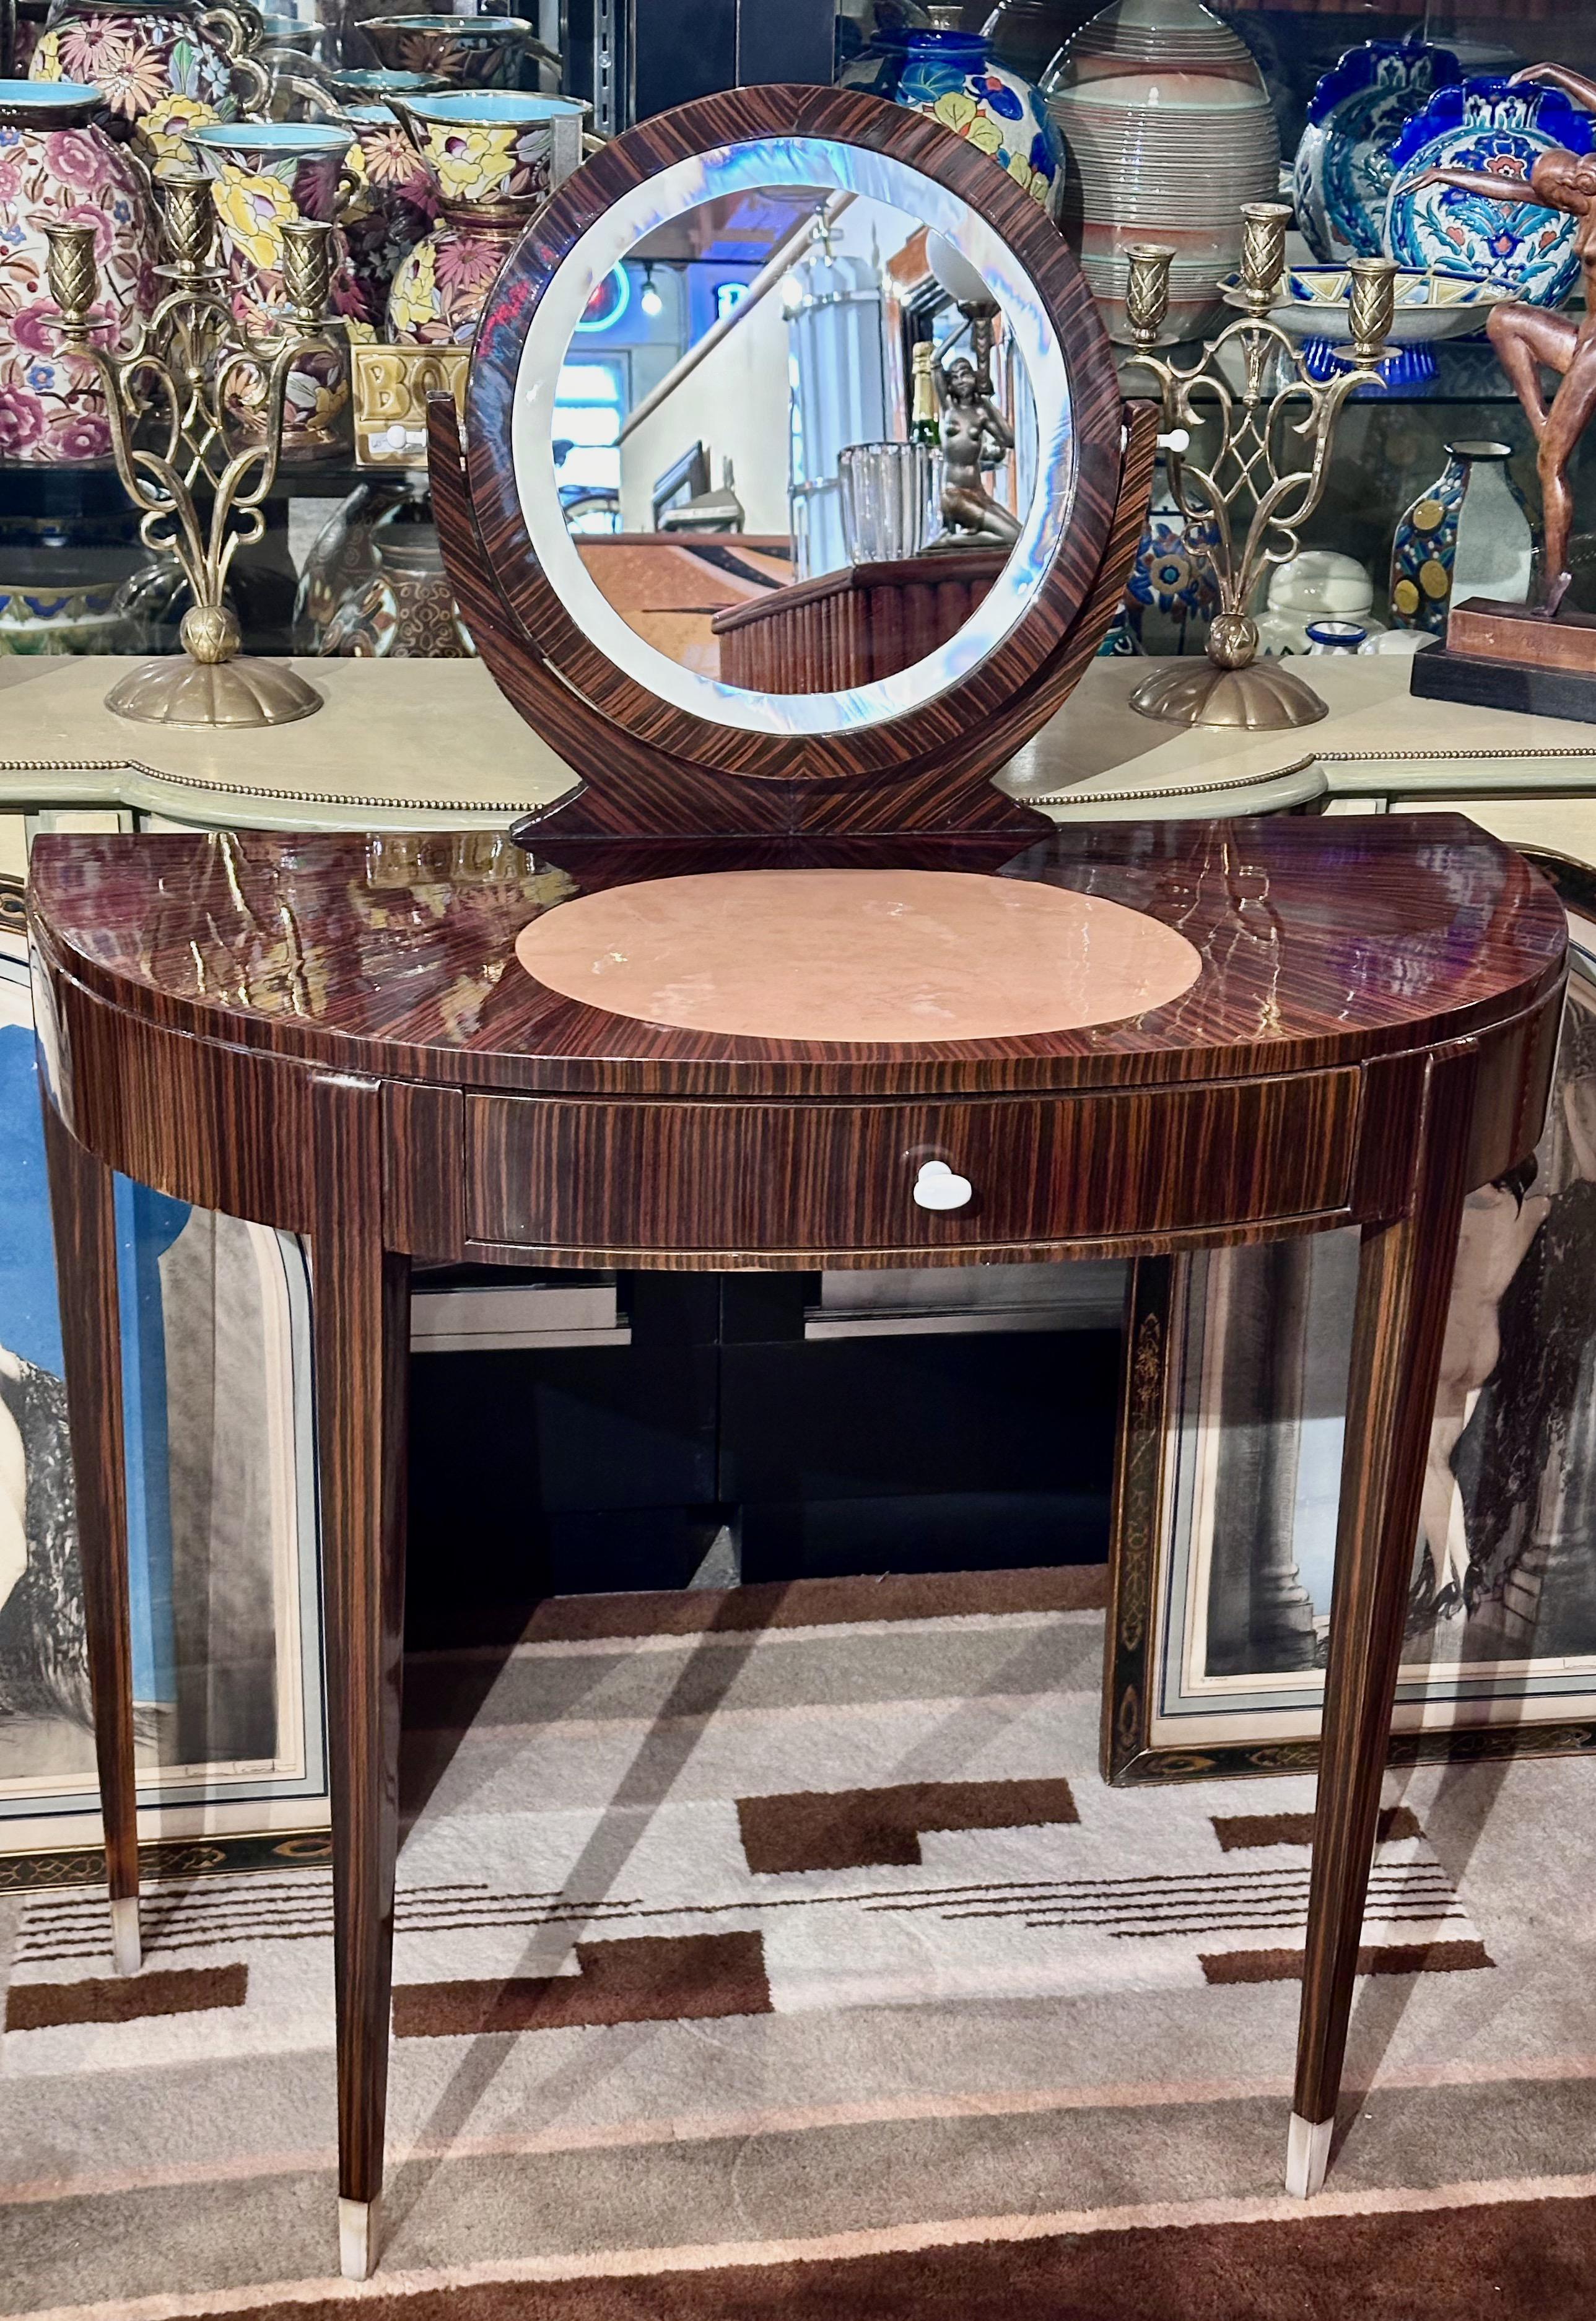 A vanity cabinet in the Ruhlmann style would likely exhibit these characteristics, with a focus on craftsmanship, geometric forms, and luxurious materials such as Macassar ebony. It features sleek lines, symmetrical patterns, and intricate inlay,